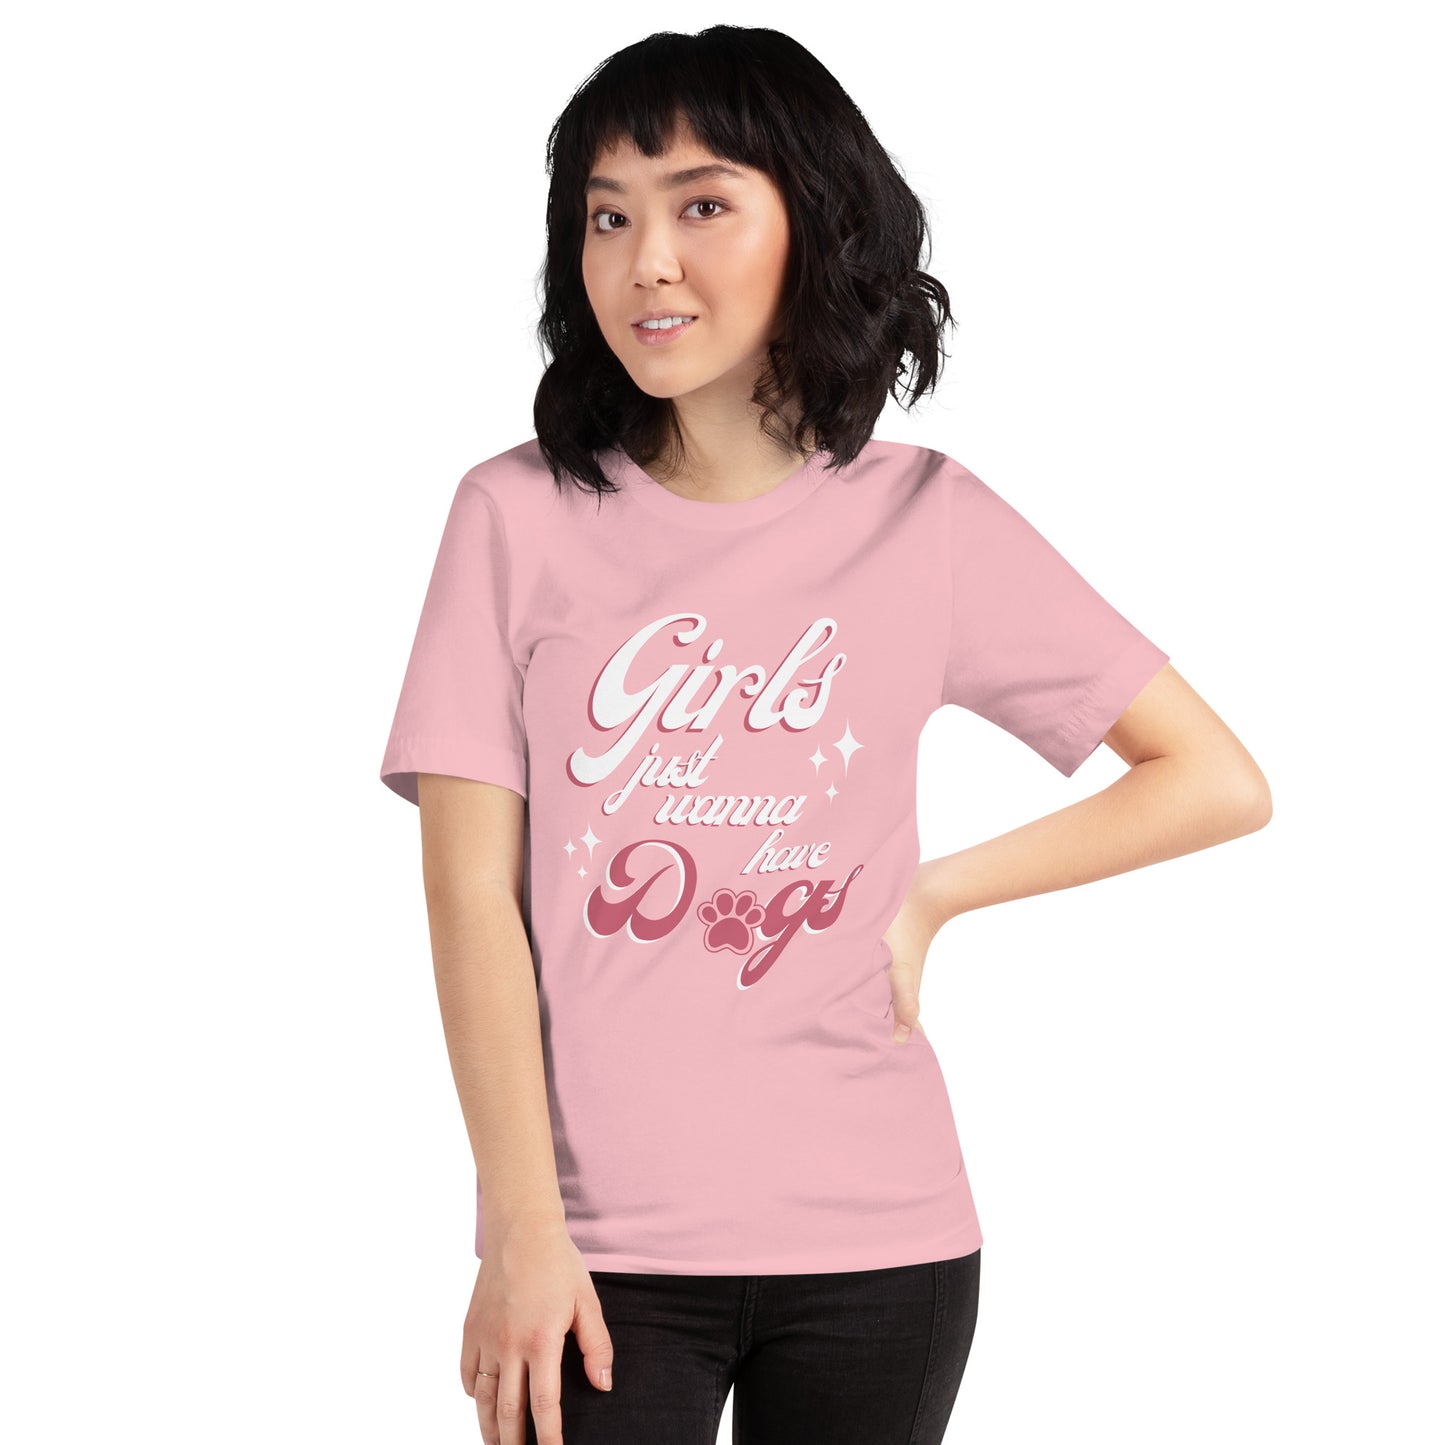 Pink Girls Just want to have Dogs Tee